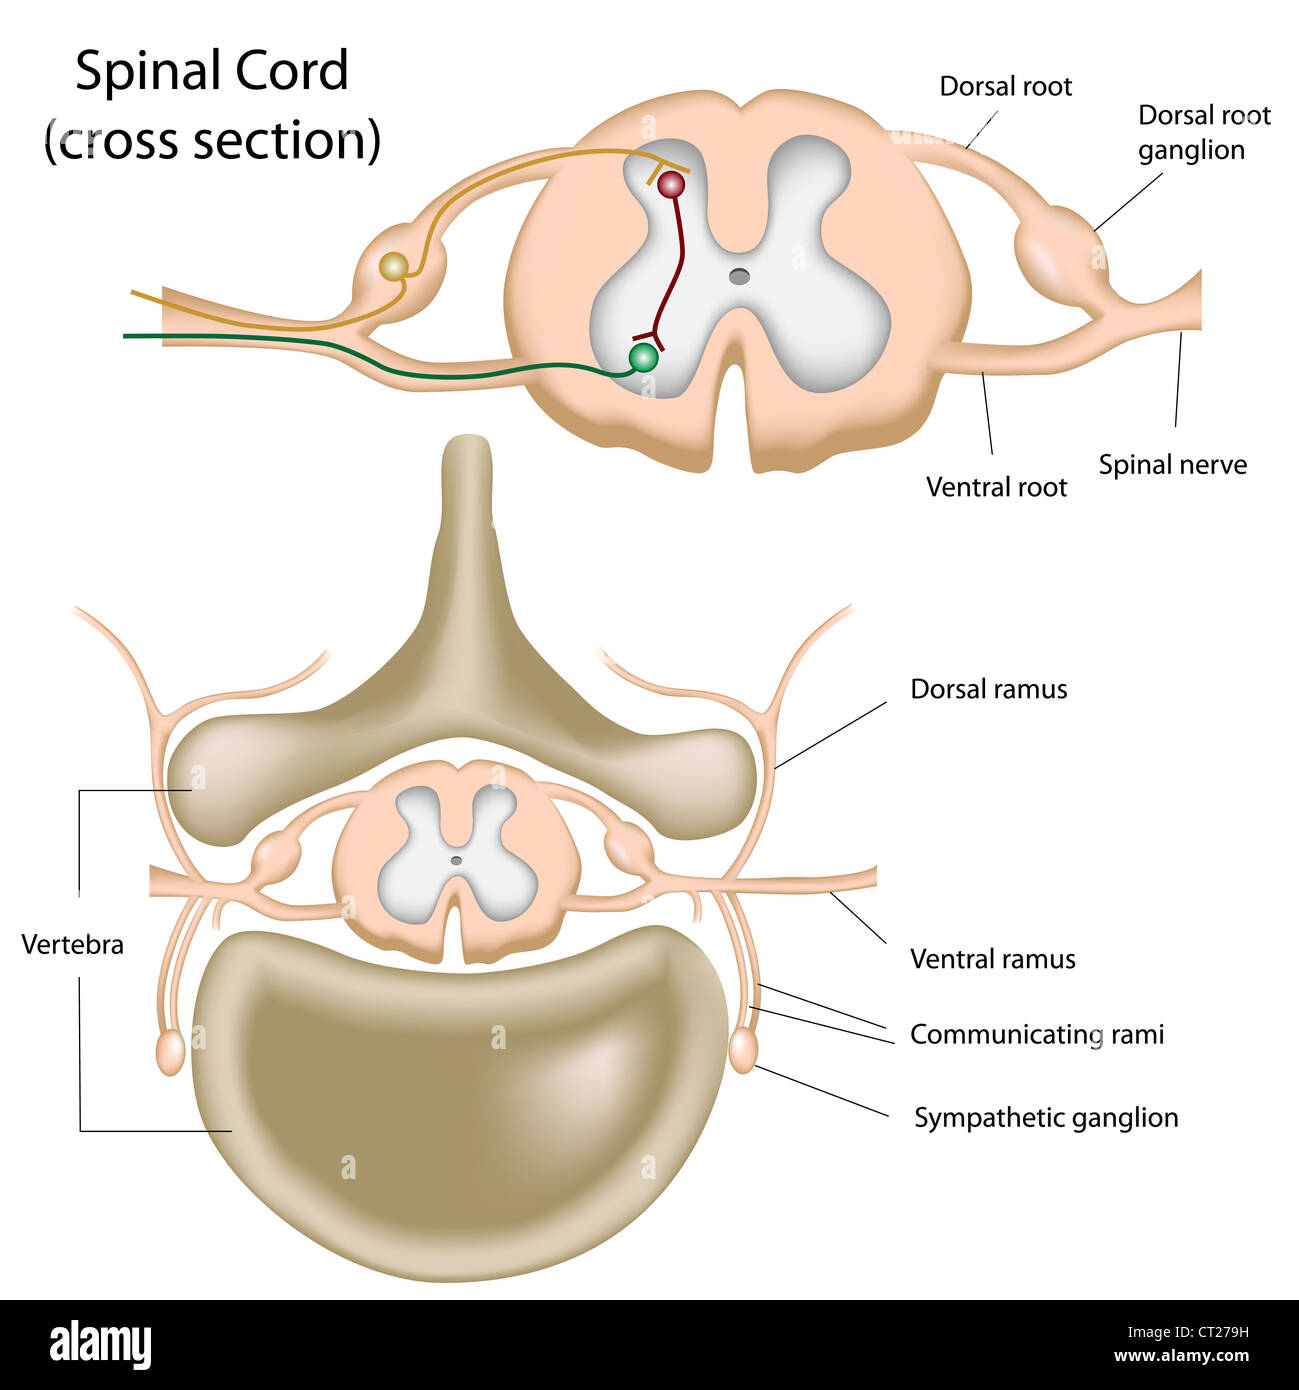 Cross section of the spinal cord Stock Photo: 49222141 - Alamy